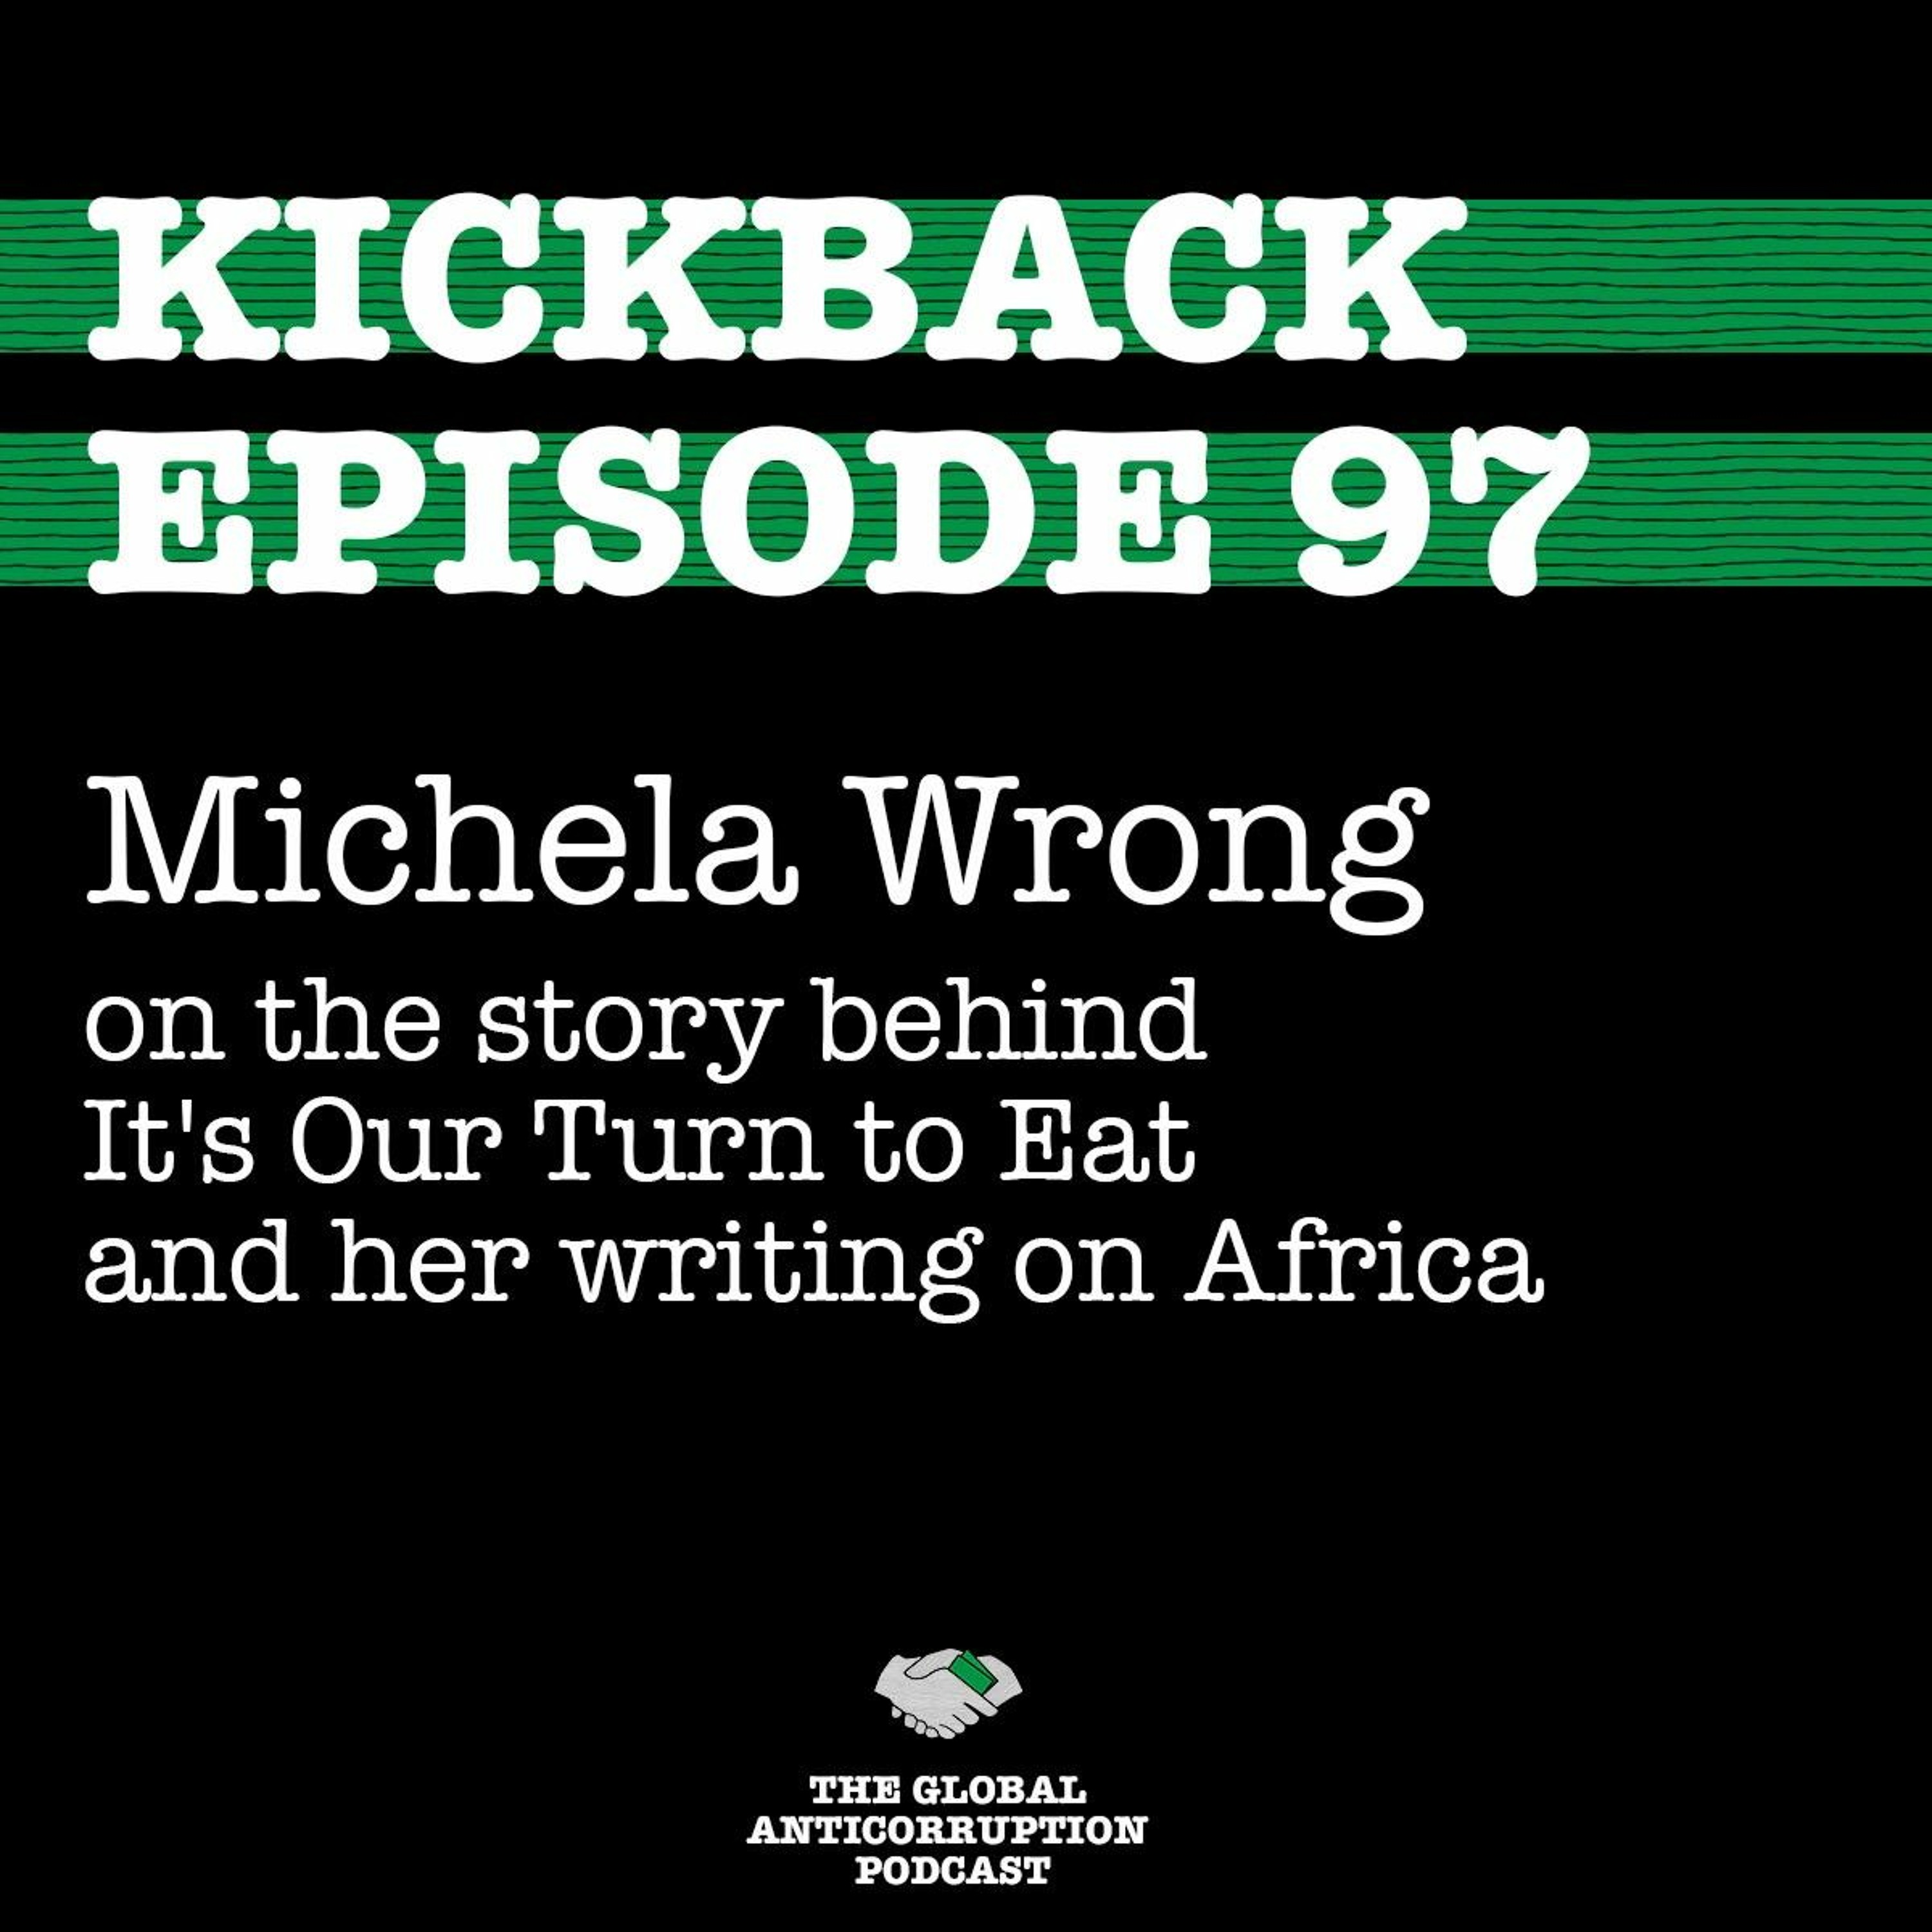 97. Michela Wrong on the story behind It's Our Turn to Eat and her writing on Africa